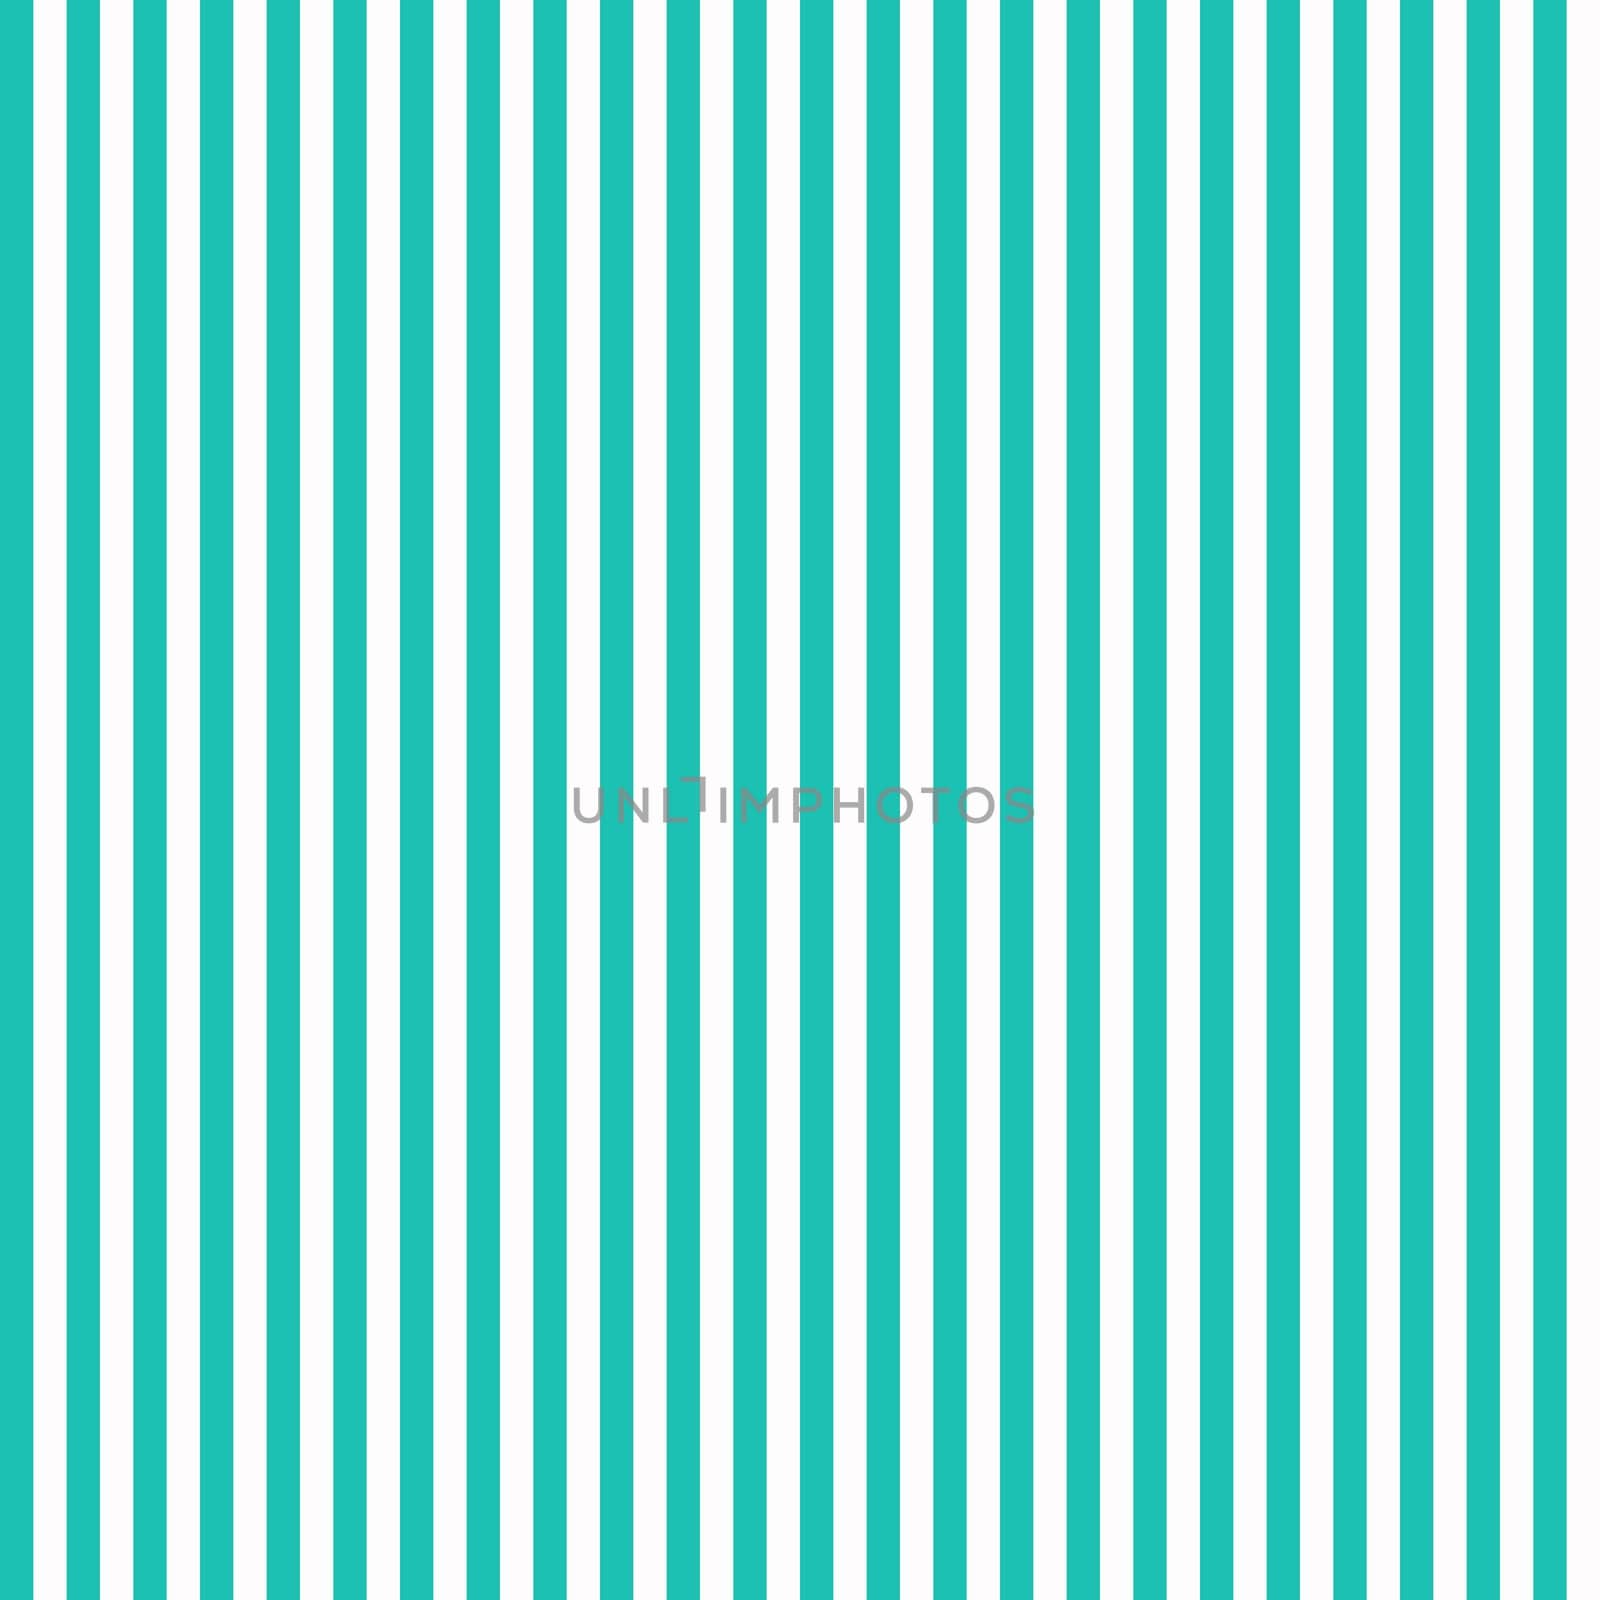 Vertical thin strip of emerald color on a white background